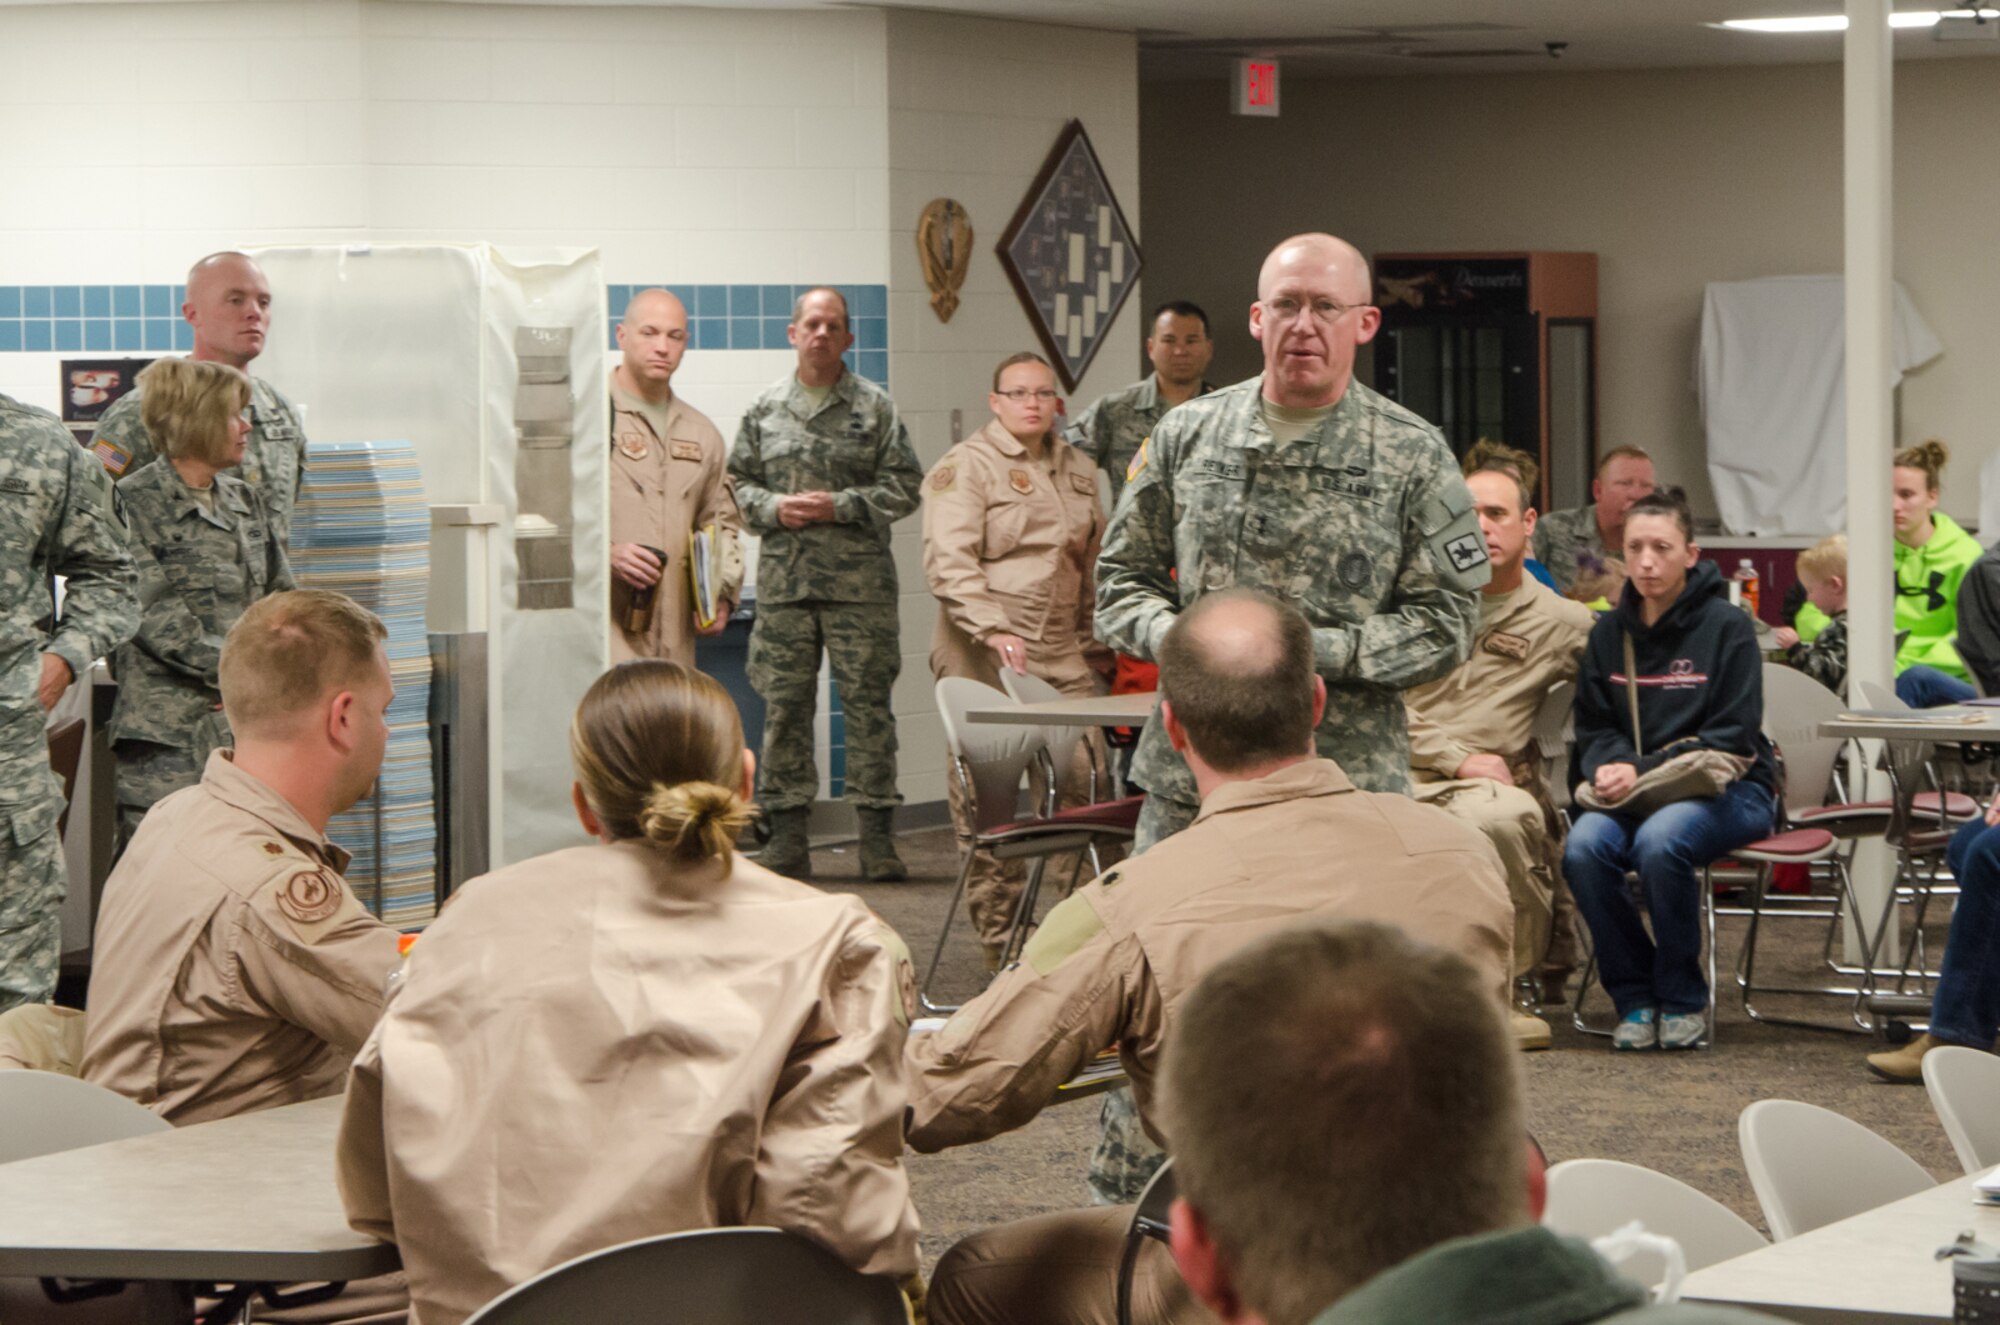 U.S. Army Maj. Gen. K. Luke Reiner addresses U.S. Air Force Airmen from the 153rd Airlift Wing, Wyoming Air National Guard.  Guard members representing operations, maintenance, medical and logistics deployed in support of the Overseas Contingency Operations in Southwest Asia. The Wyoming Air National Guard Airmen and aircraft are relieving members of the 130th Airlift Wing, Charleston West Virginia. (U.S. Air National Guard photo by Tech. Sgt. John Galvin/released)